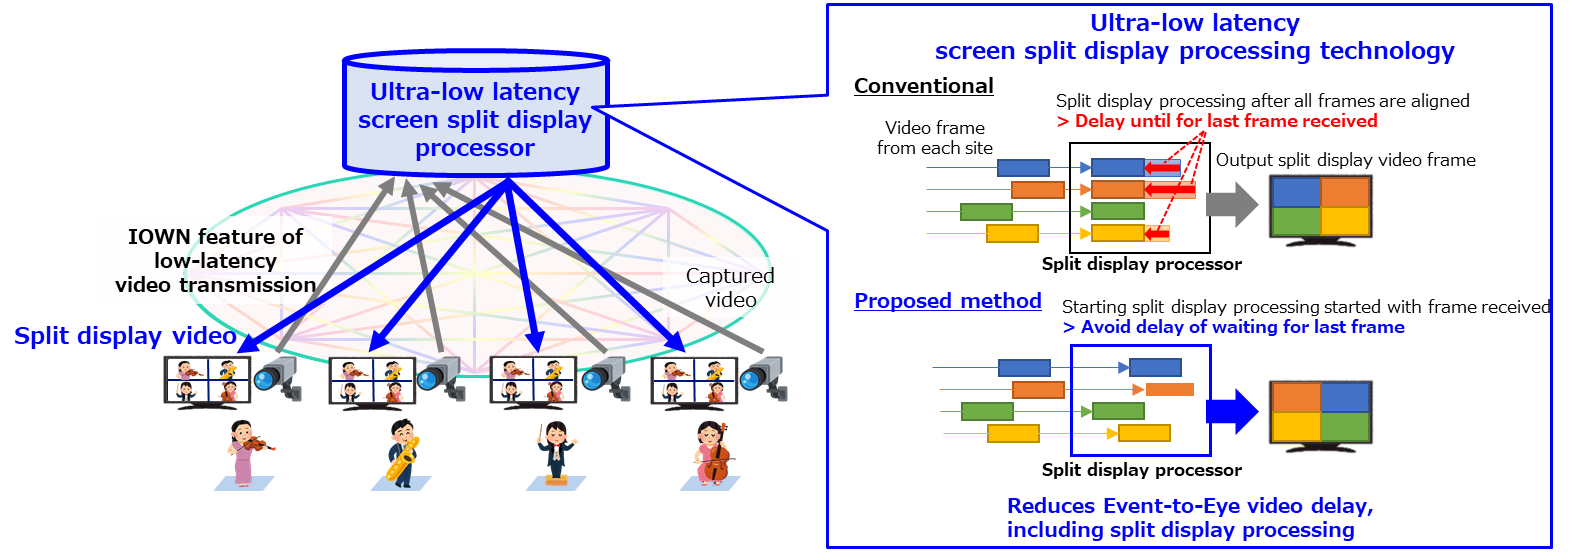 Figure 2: Remote video communication using ultra-low latency screen split display processing technology in IOWN concept